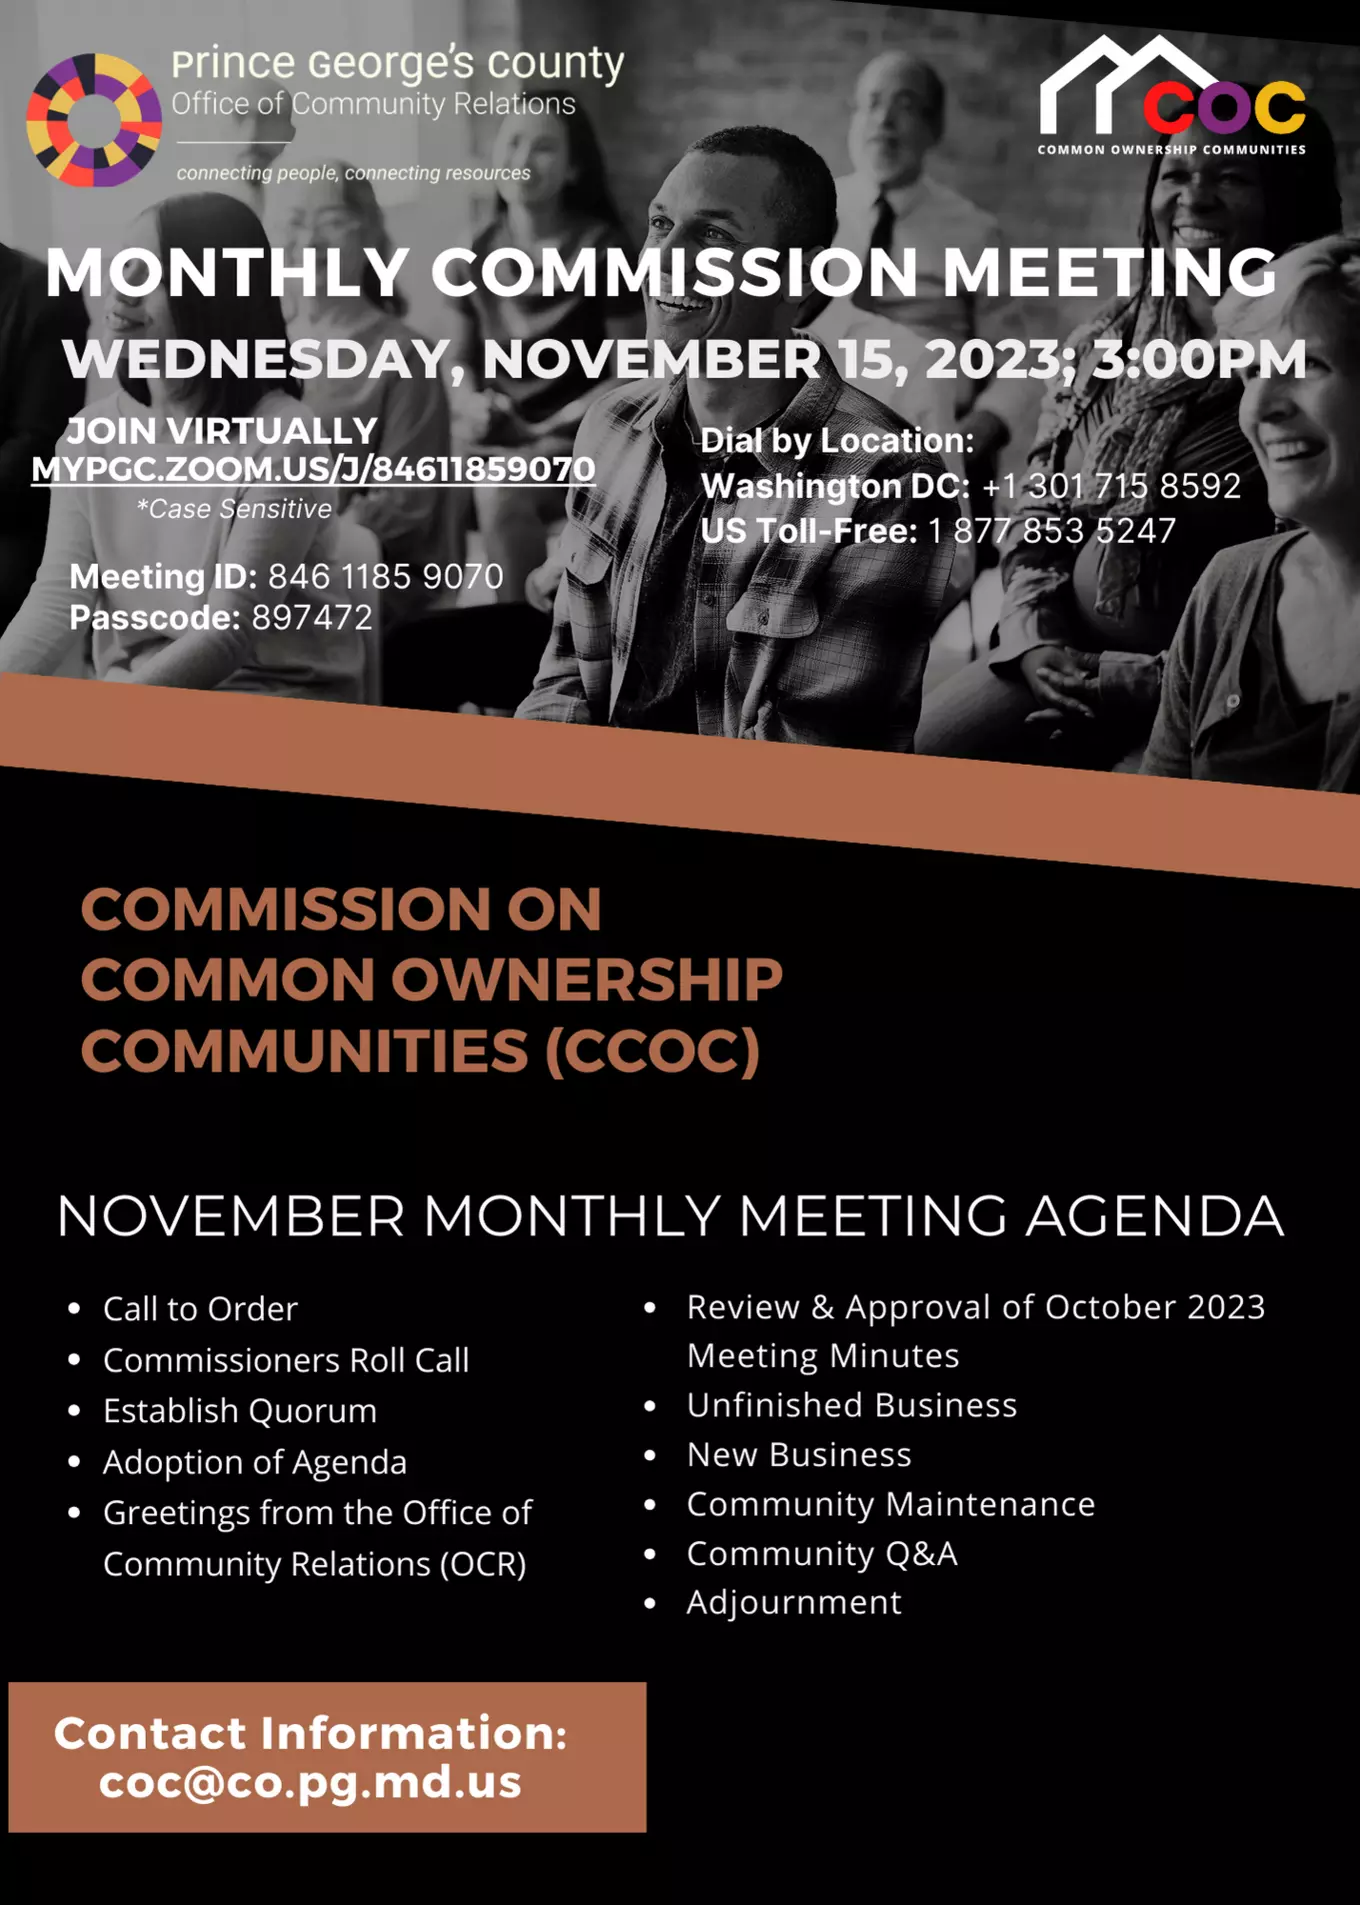 The Prince George’s County Office of Community Relations on Wednesday, November 15th, 2023, at 3:00 pm will partner with the Commission on Common Ownership Communities to host a virtual meeting.